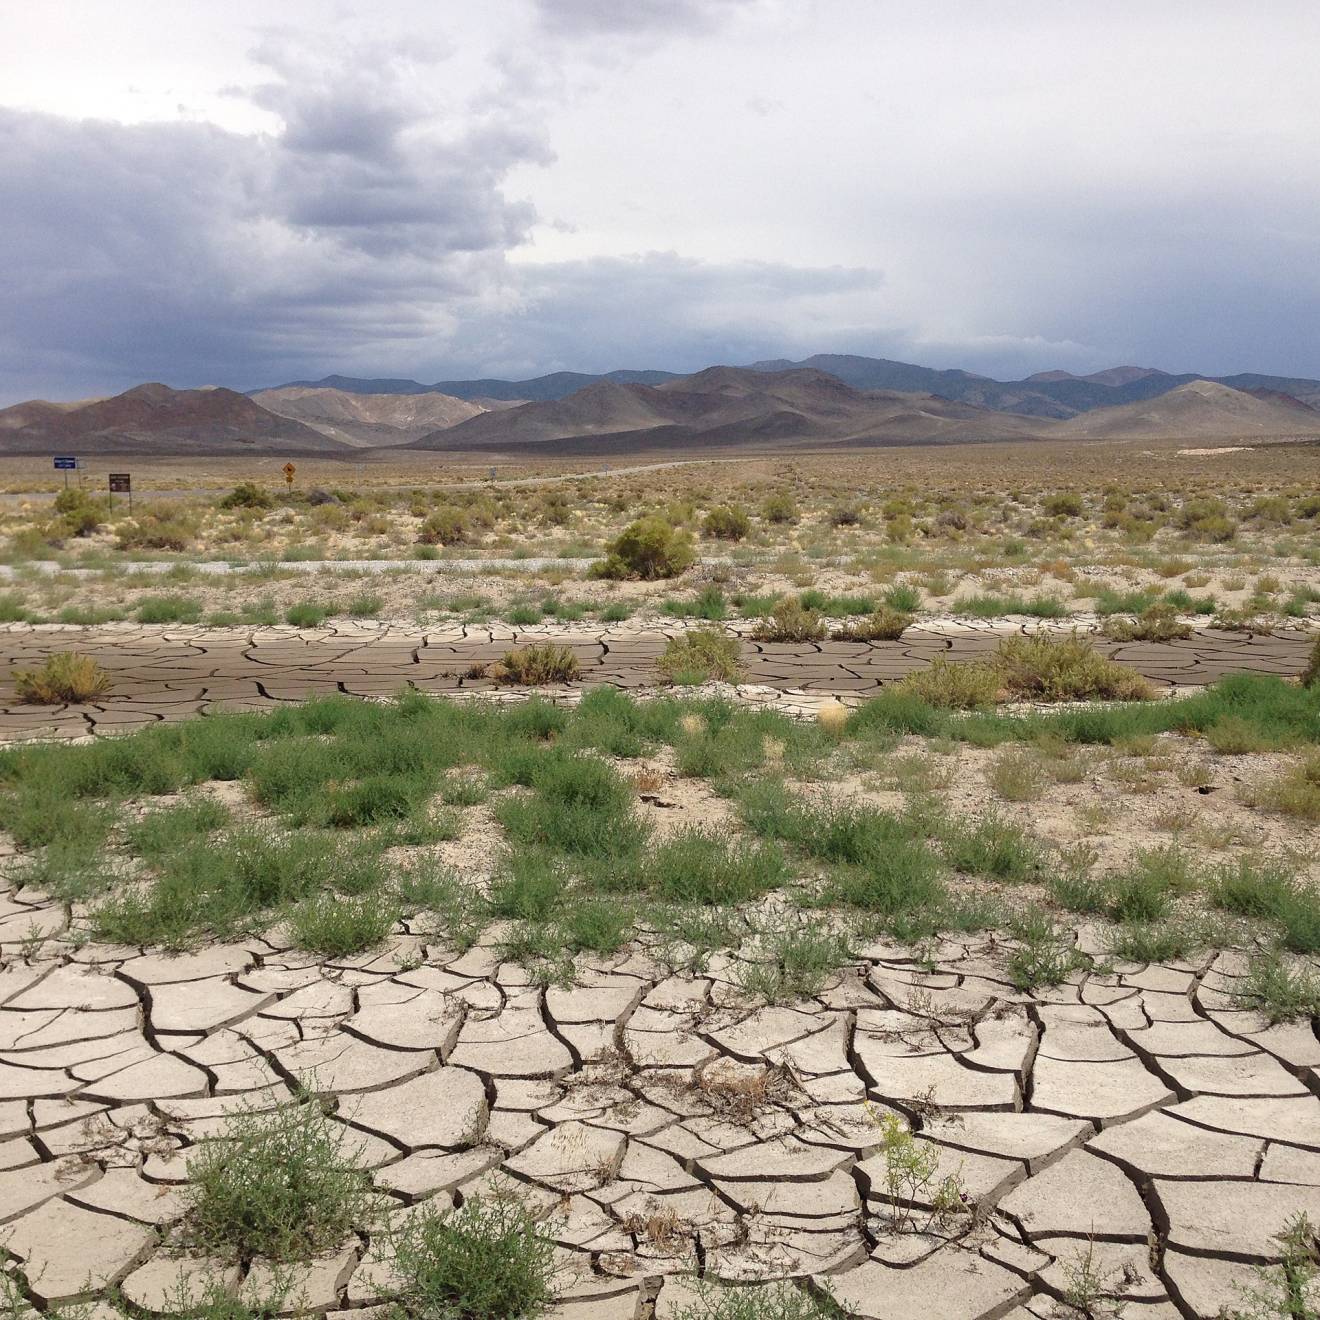 A parched Nevada landscape showing dry cracked earth